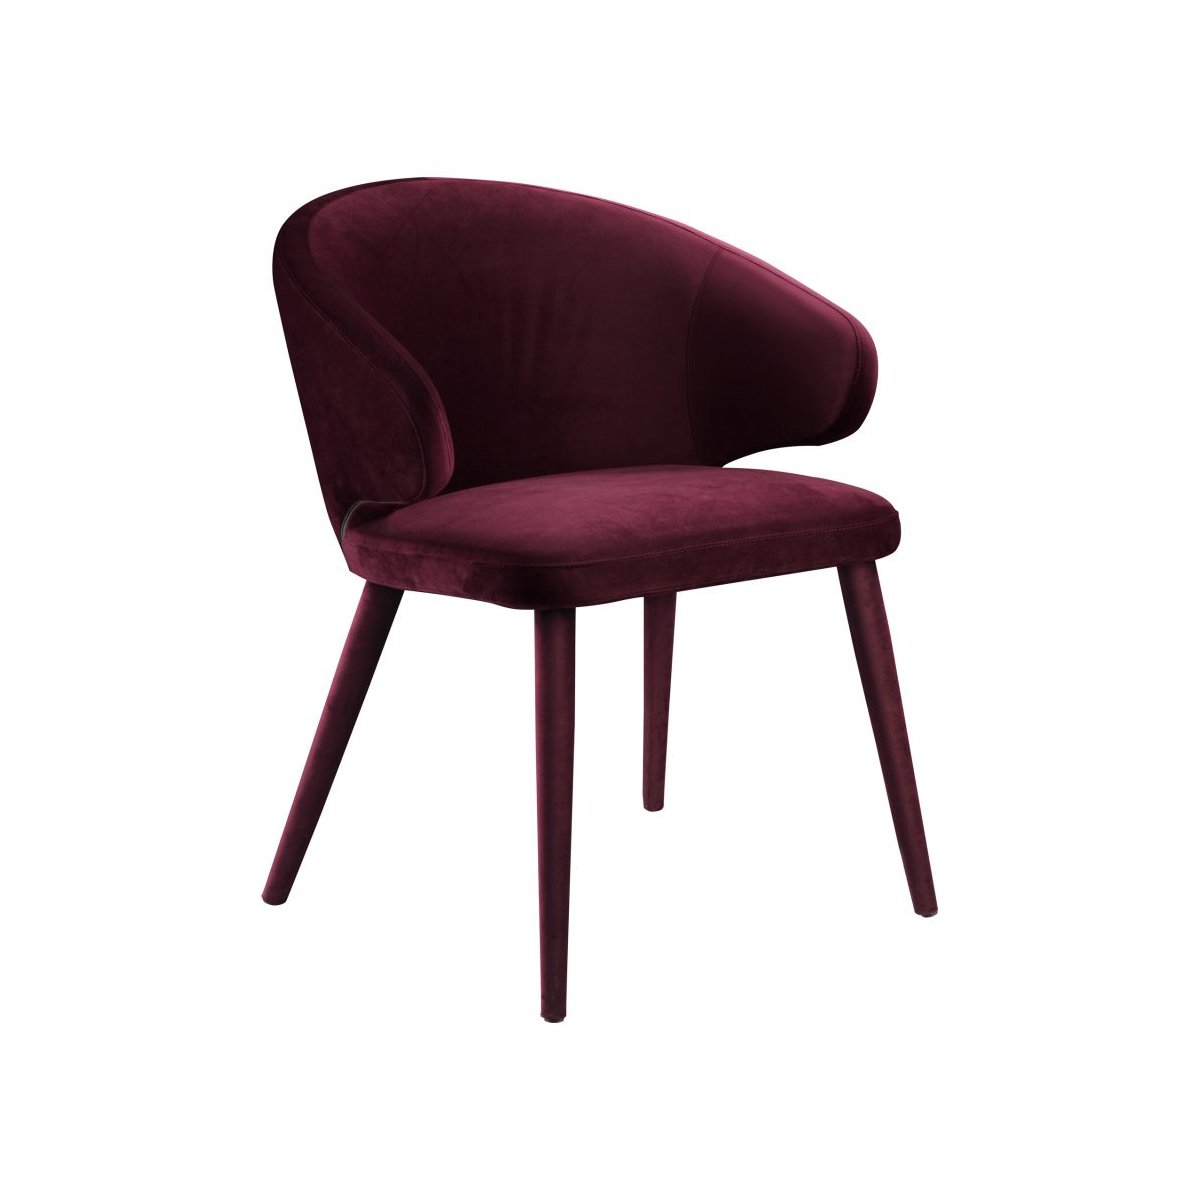 Load image into Gallery viewer, Stewart Dining Chair Purple Dining Chairs Moe&amp;#39;s     Four Hands, Burke Decor, Mid Century Modern Furniture, Old Bones Furniture Company, Old Bones Co, Modern Mid Century, Designer Furniture, https://www.oldbonesco.com/
